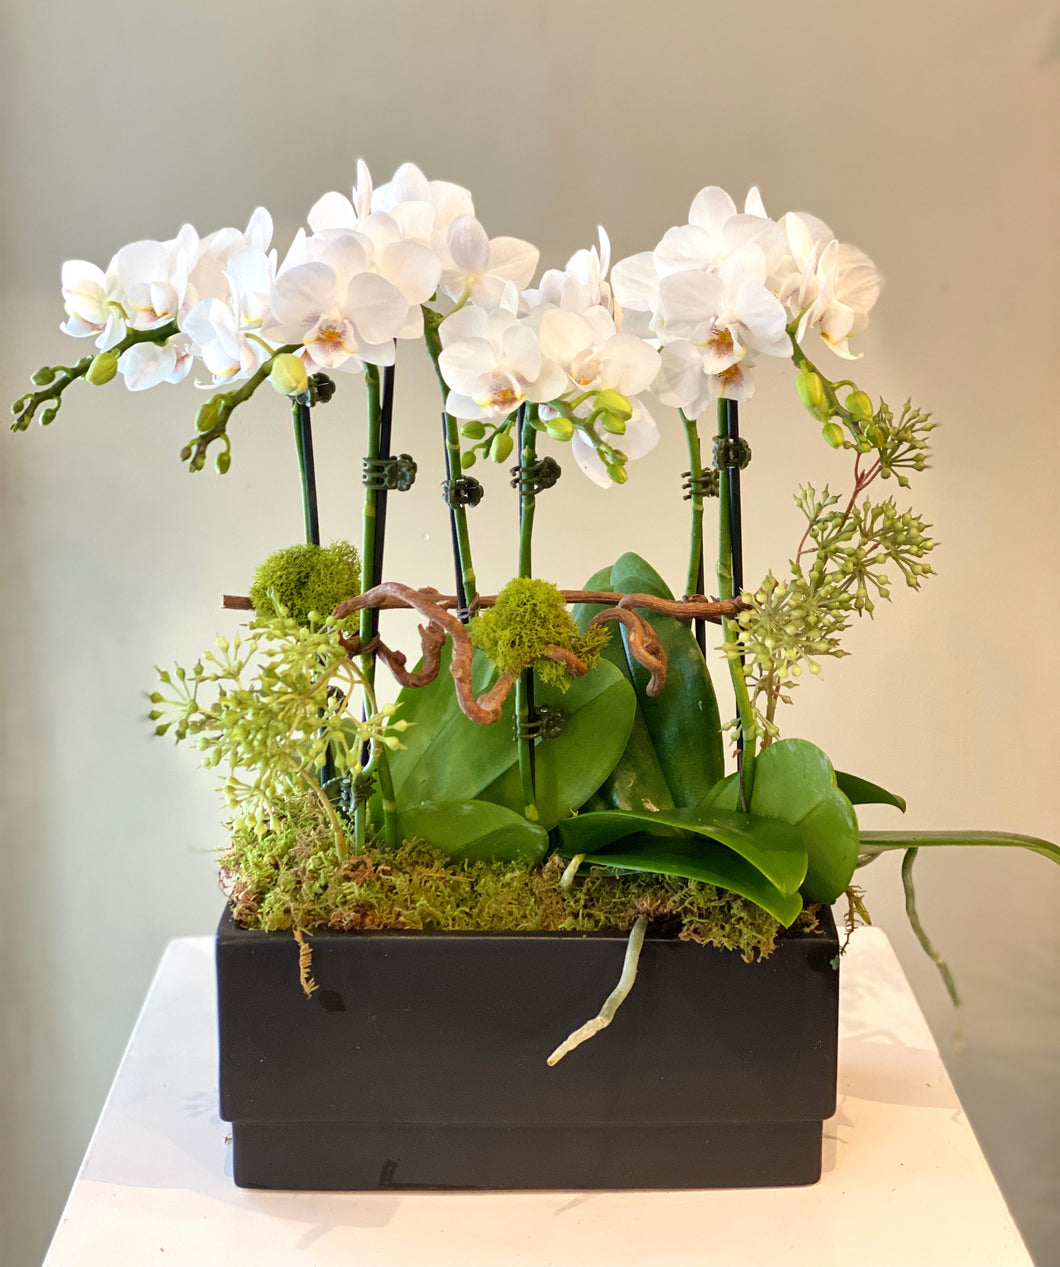 P70 -  Modern Mini White Orchid Arrangement (white orchid variety based on availability)